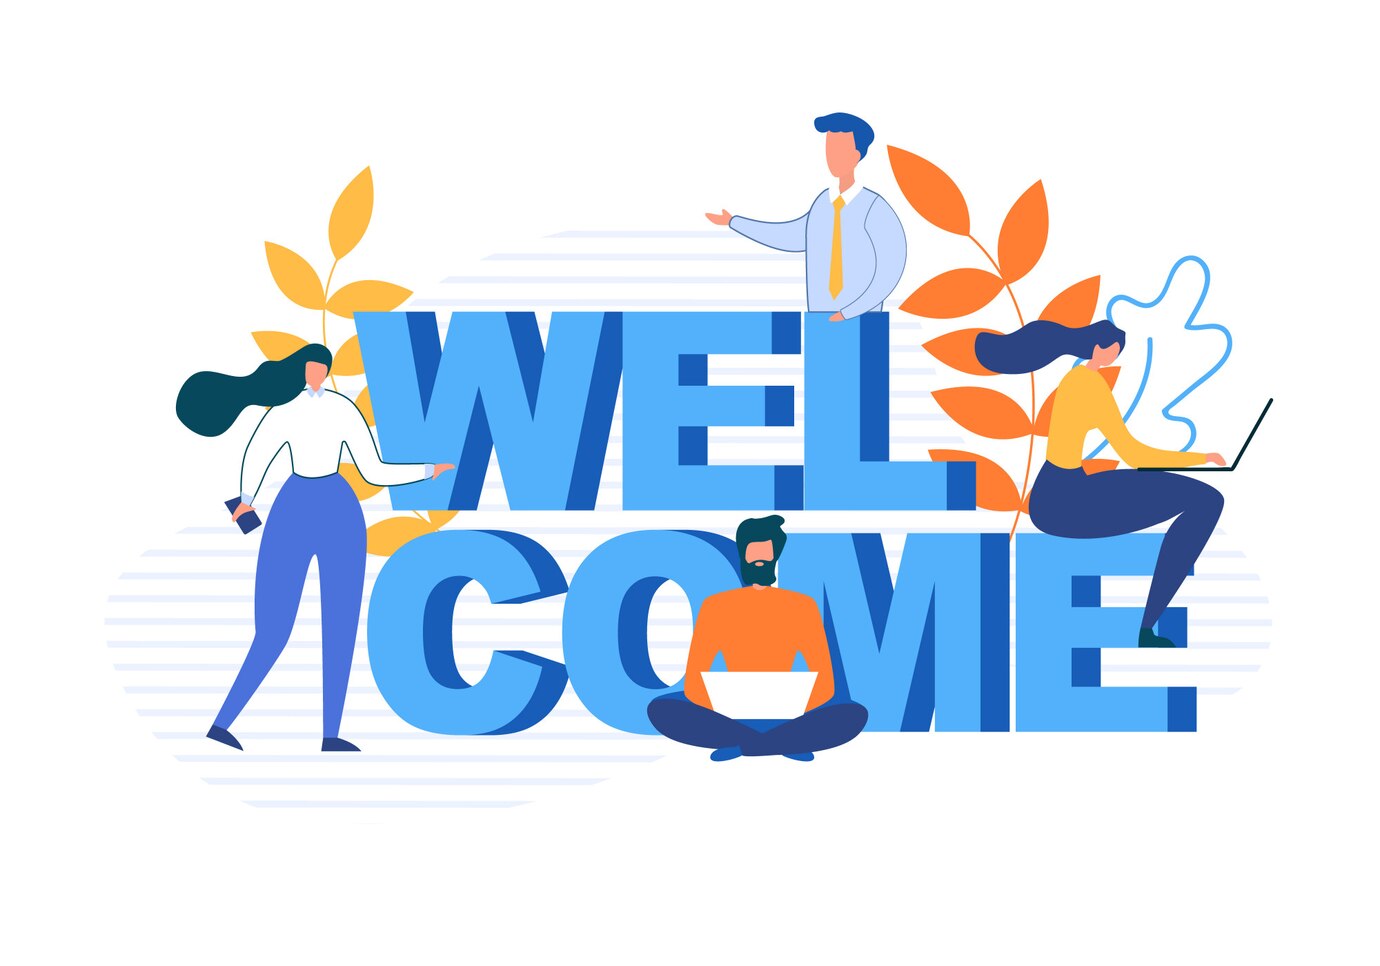 Create a welcoming onboarding process for new hires